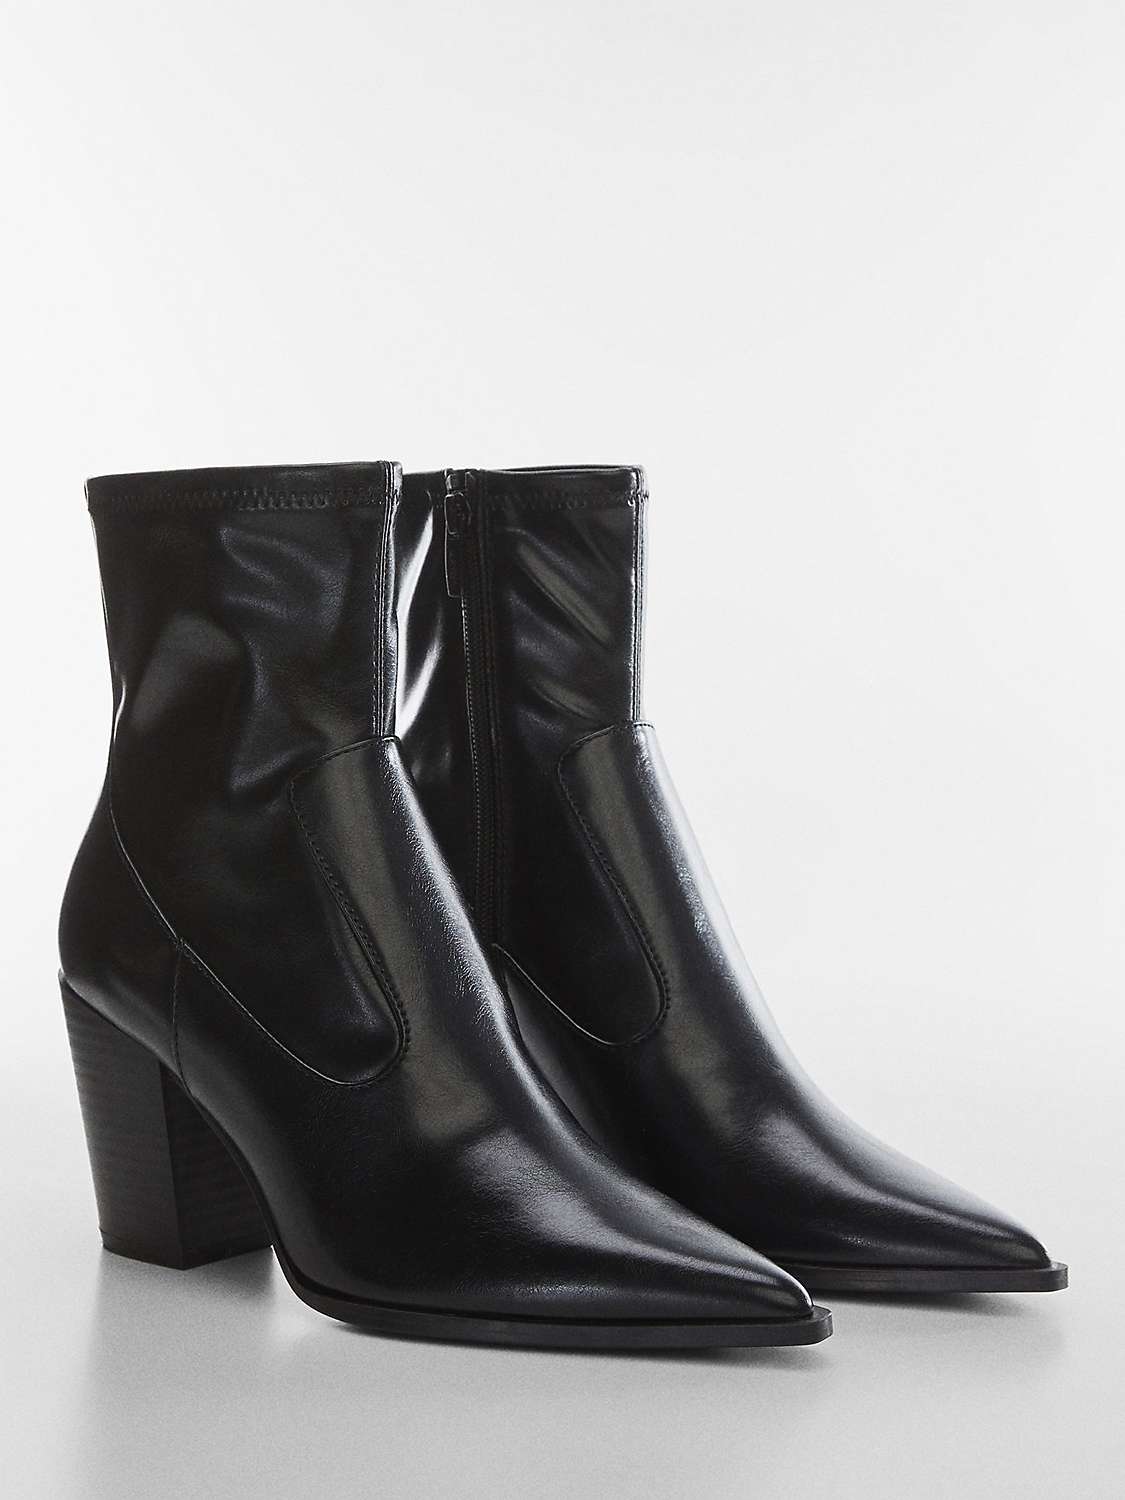 Mango Vora Pointy Faux Leather Ankle Boots, Black at John Lewis & Partners